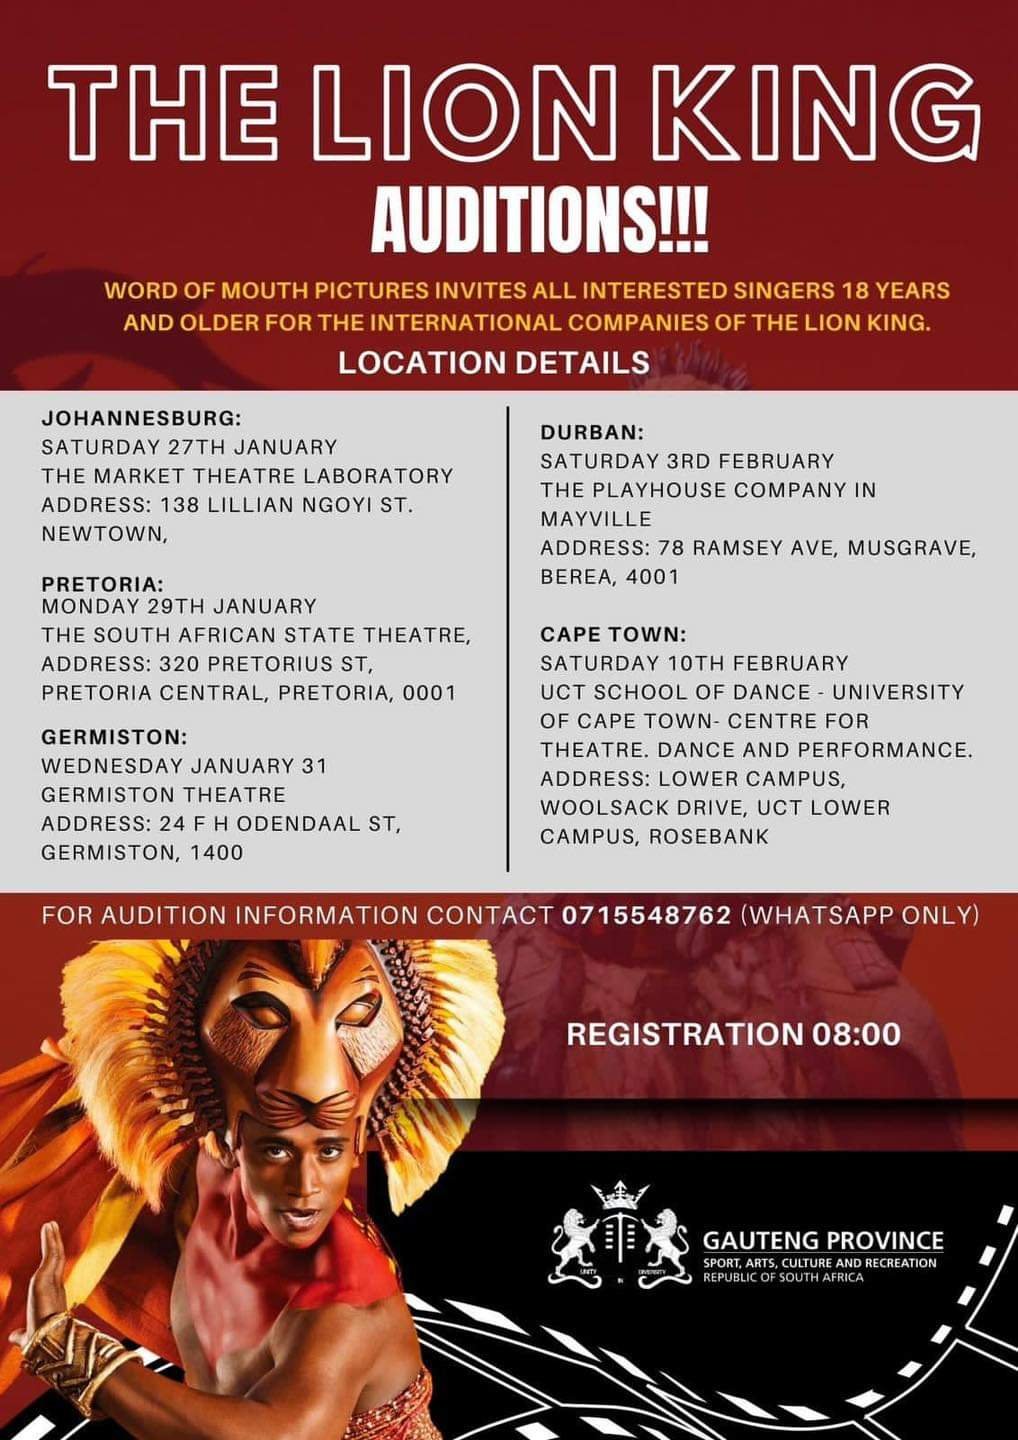 Unleash Your Roar: The Lion King Auditions Open for Aspiring Stars